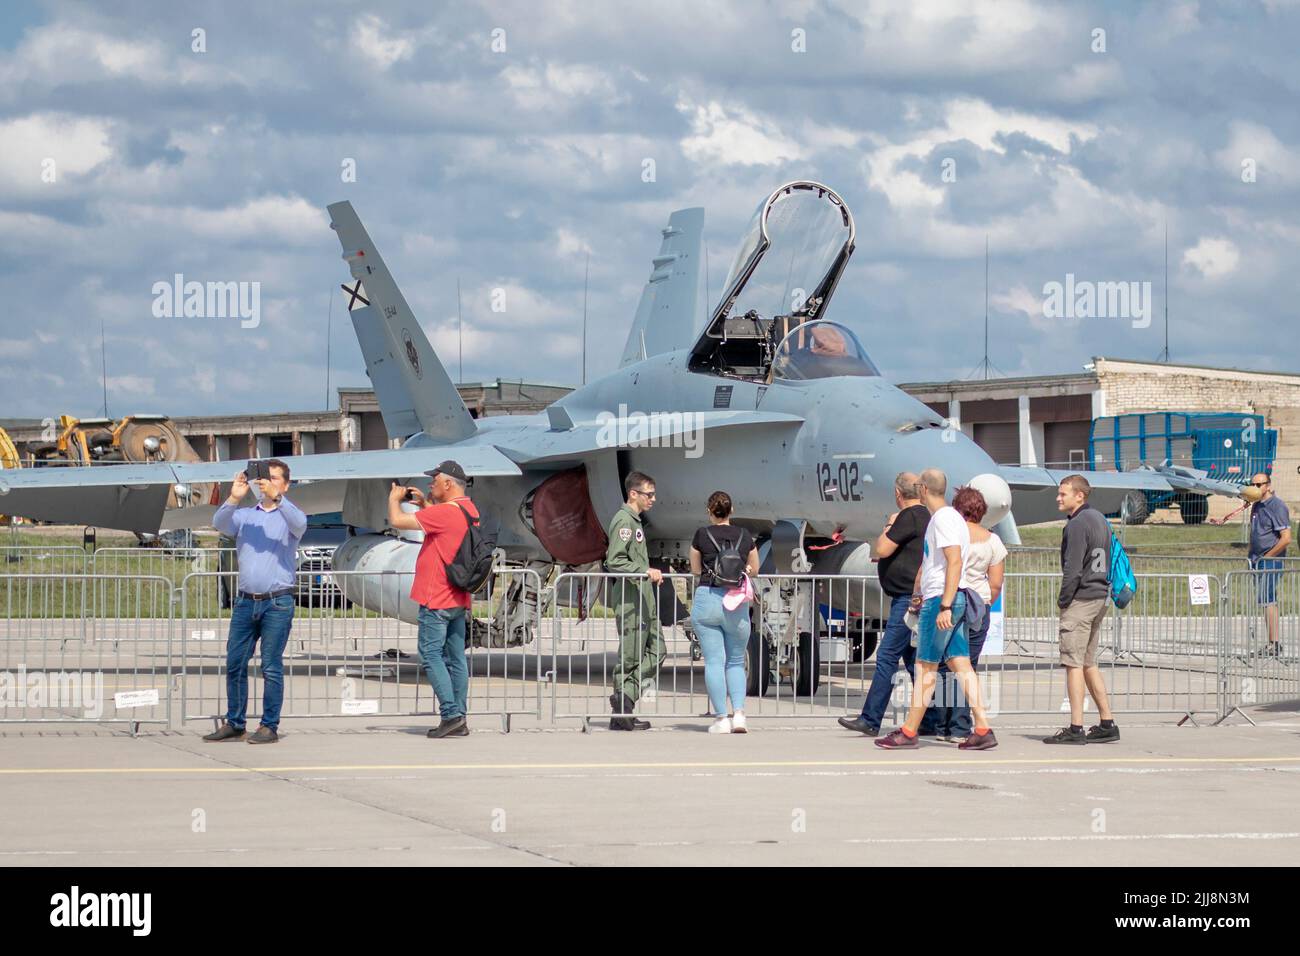 SIAULIAI / LITHUANIA - July 27, 2019: Spanish Air Force McDonnell Douglas F/A-18 Hornet fighter jet aircraft static display at air show Stock Photo